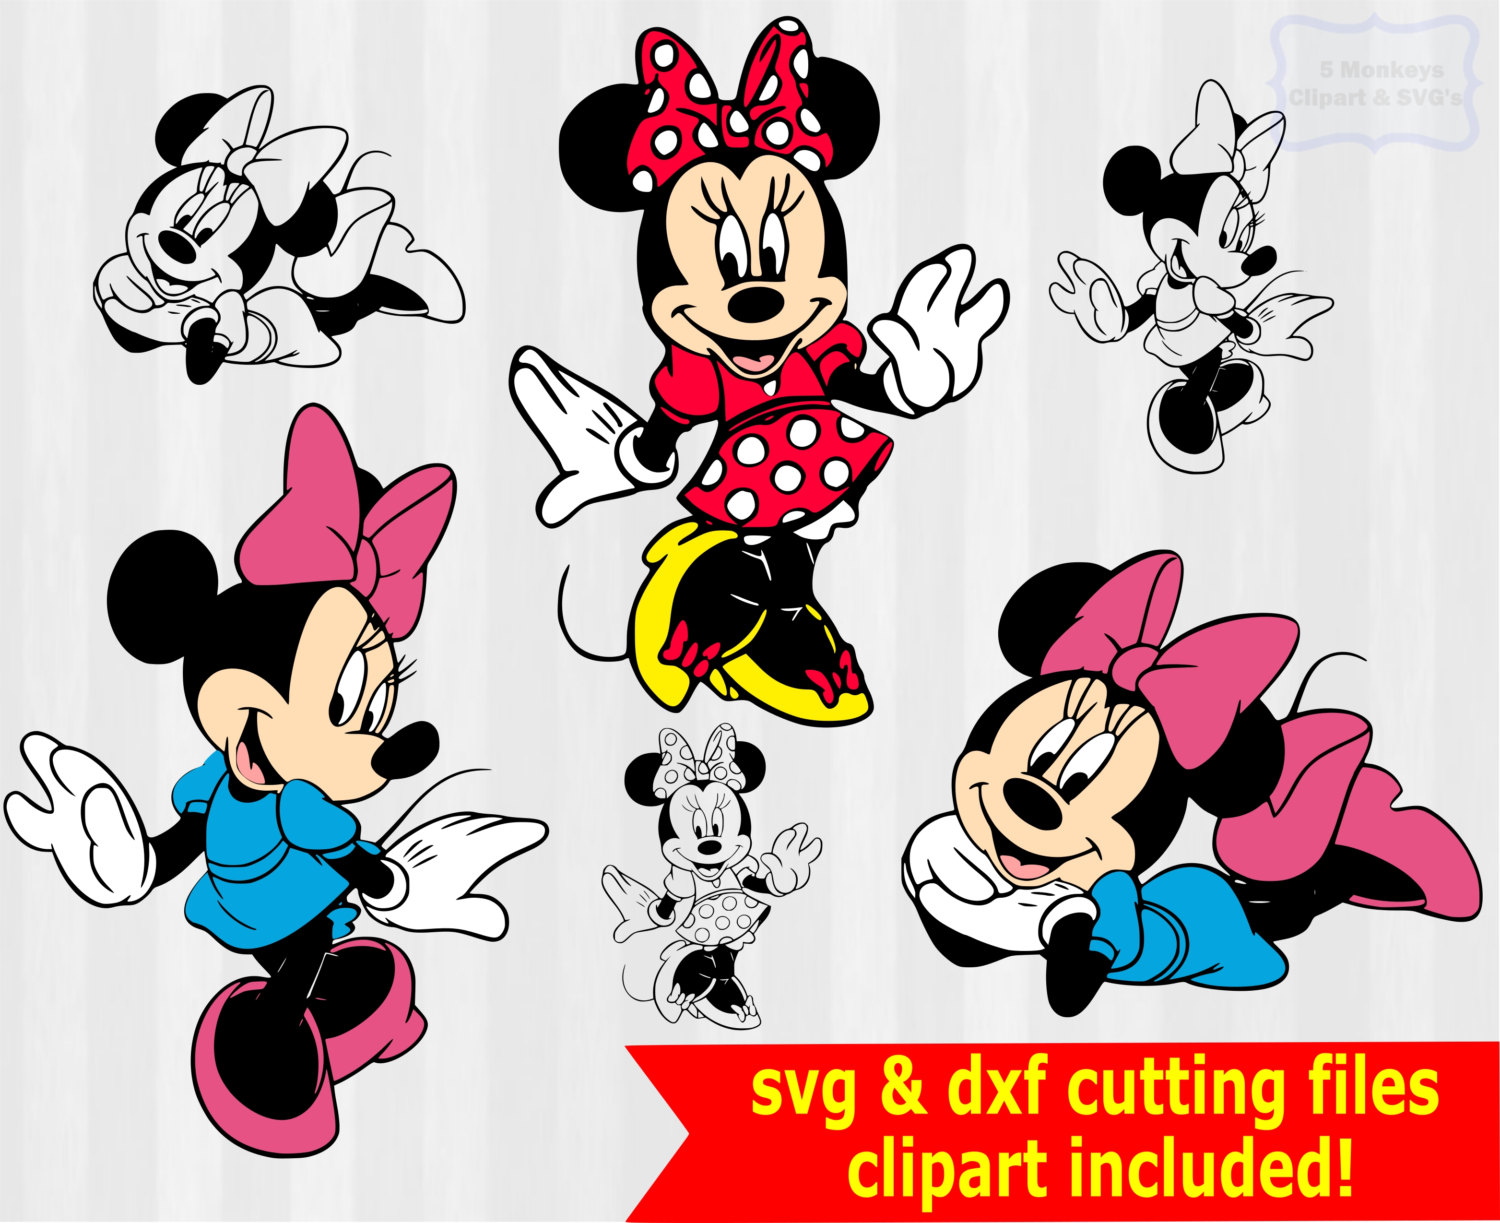 Minnie mouse svg file Minnie mouse clip art Minnie by 5StarClipart